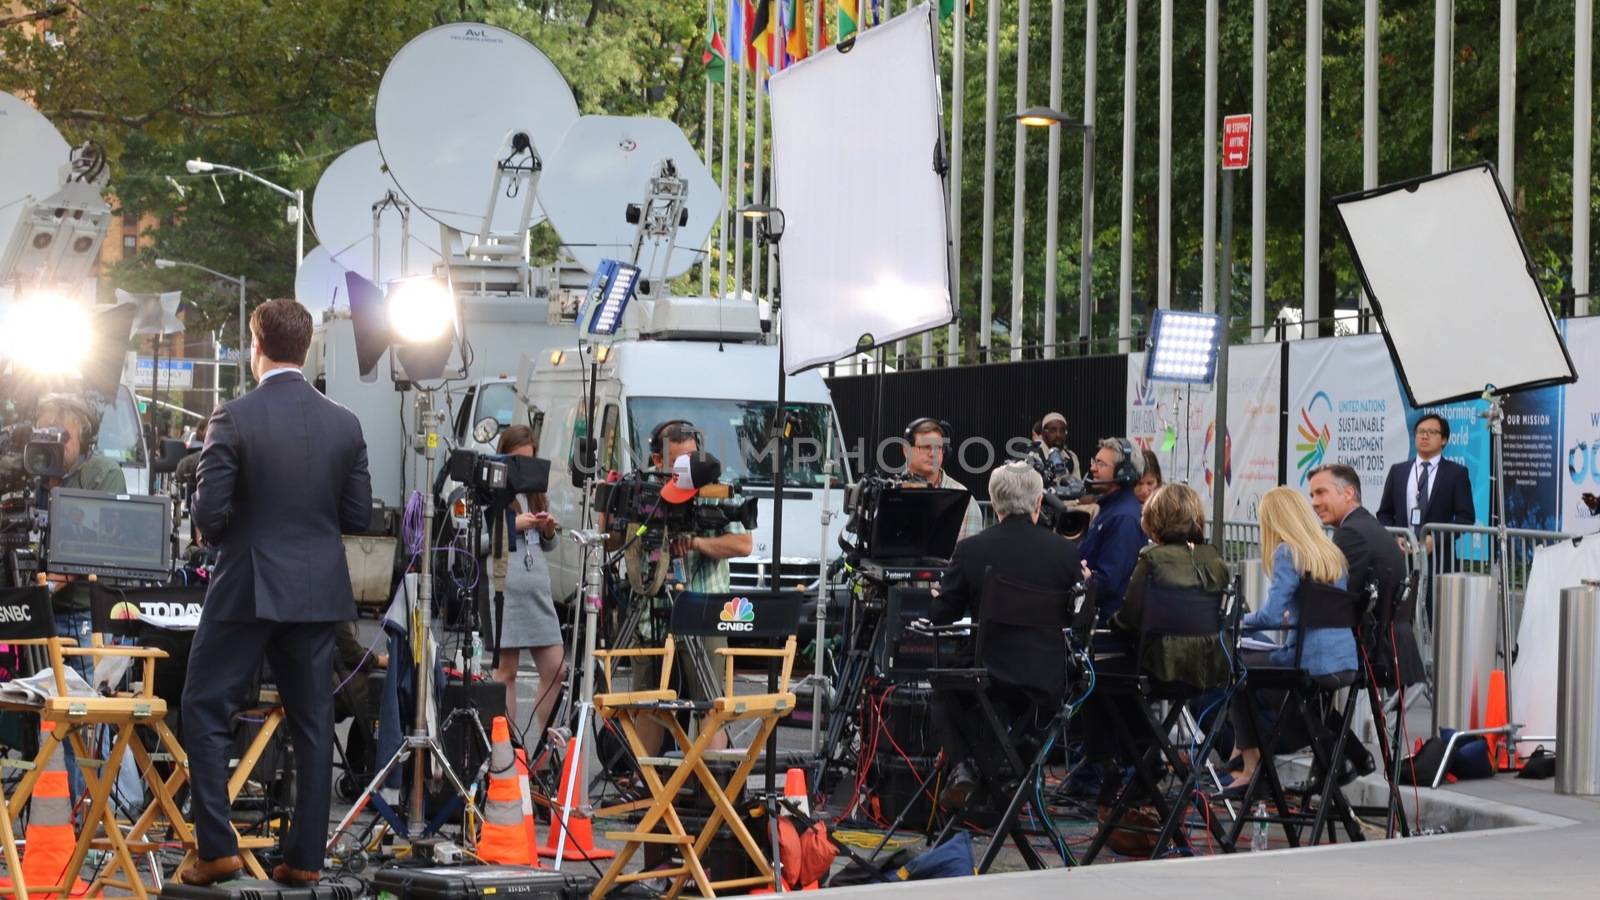 UNITED STATES, New York: Television news crews broadcast near the United Nations headquarters in New York City ahead of the address by Pope Francis at the United Nations, September 25, 2015. 